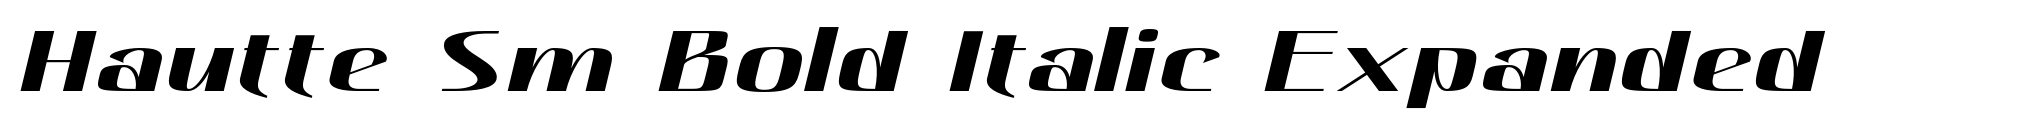 Hautte Sm Bold Italic Expanded image